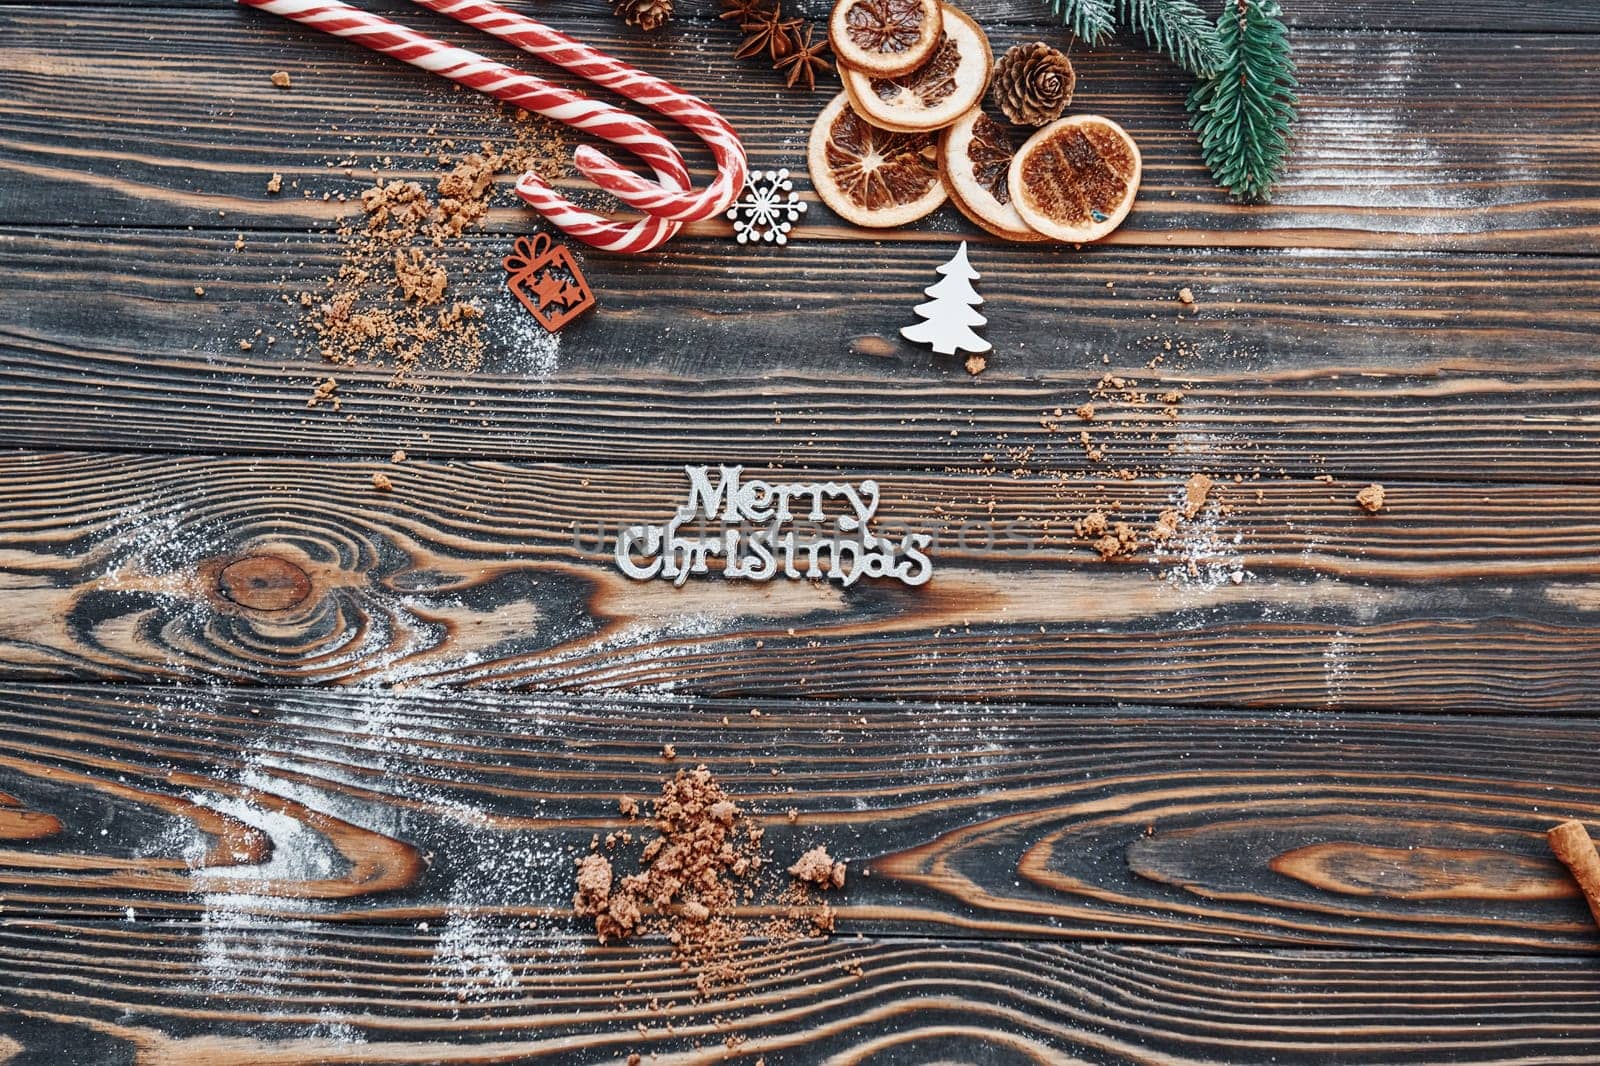 Candies and slices of oranges. Christmas background with holiday decoration.